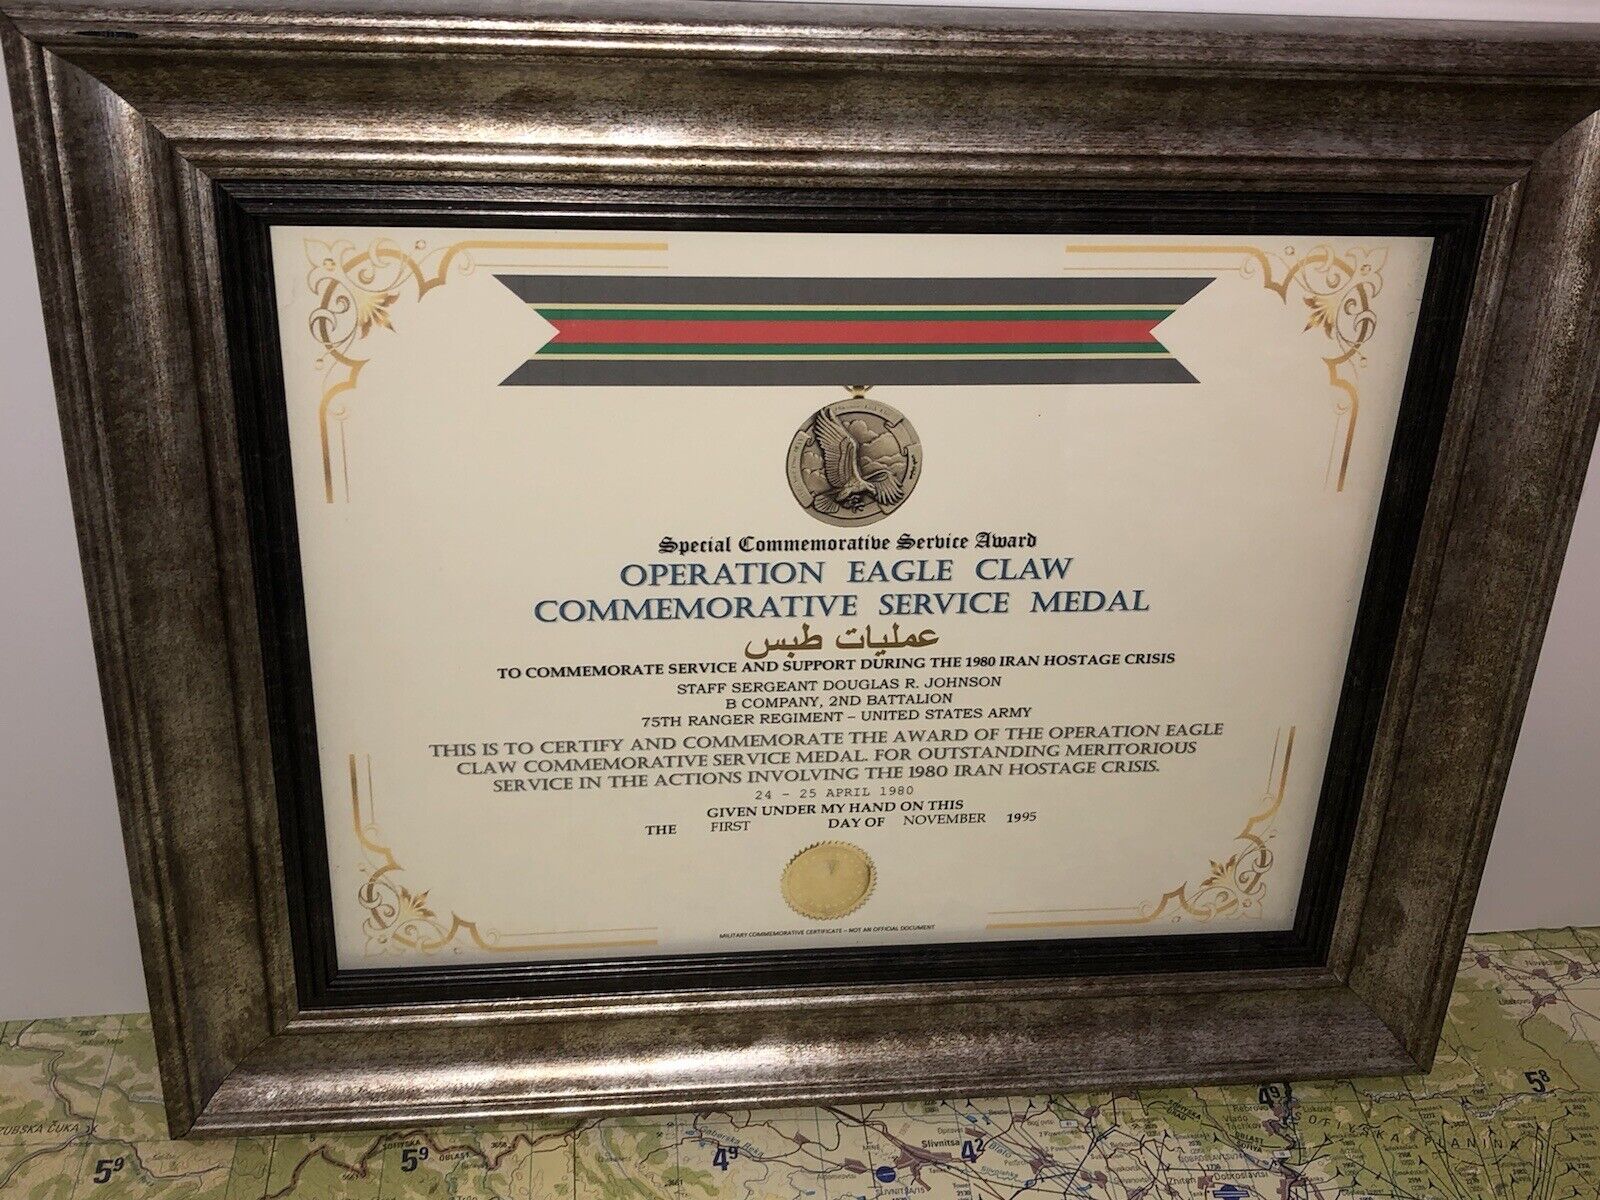 SCSA - OPERATION EAGLE CLAW [1980 IRAN] COMMEMORATIVE MEDAL CERTIFICATE ~ Type 1